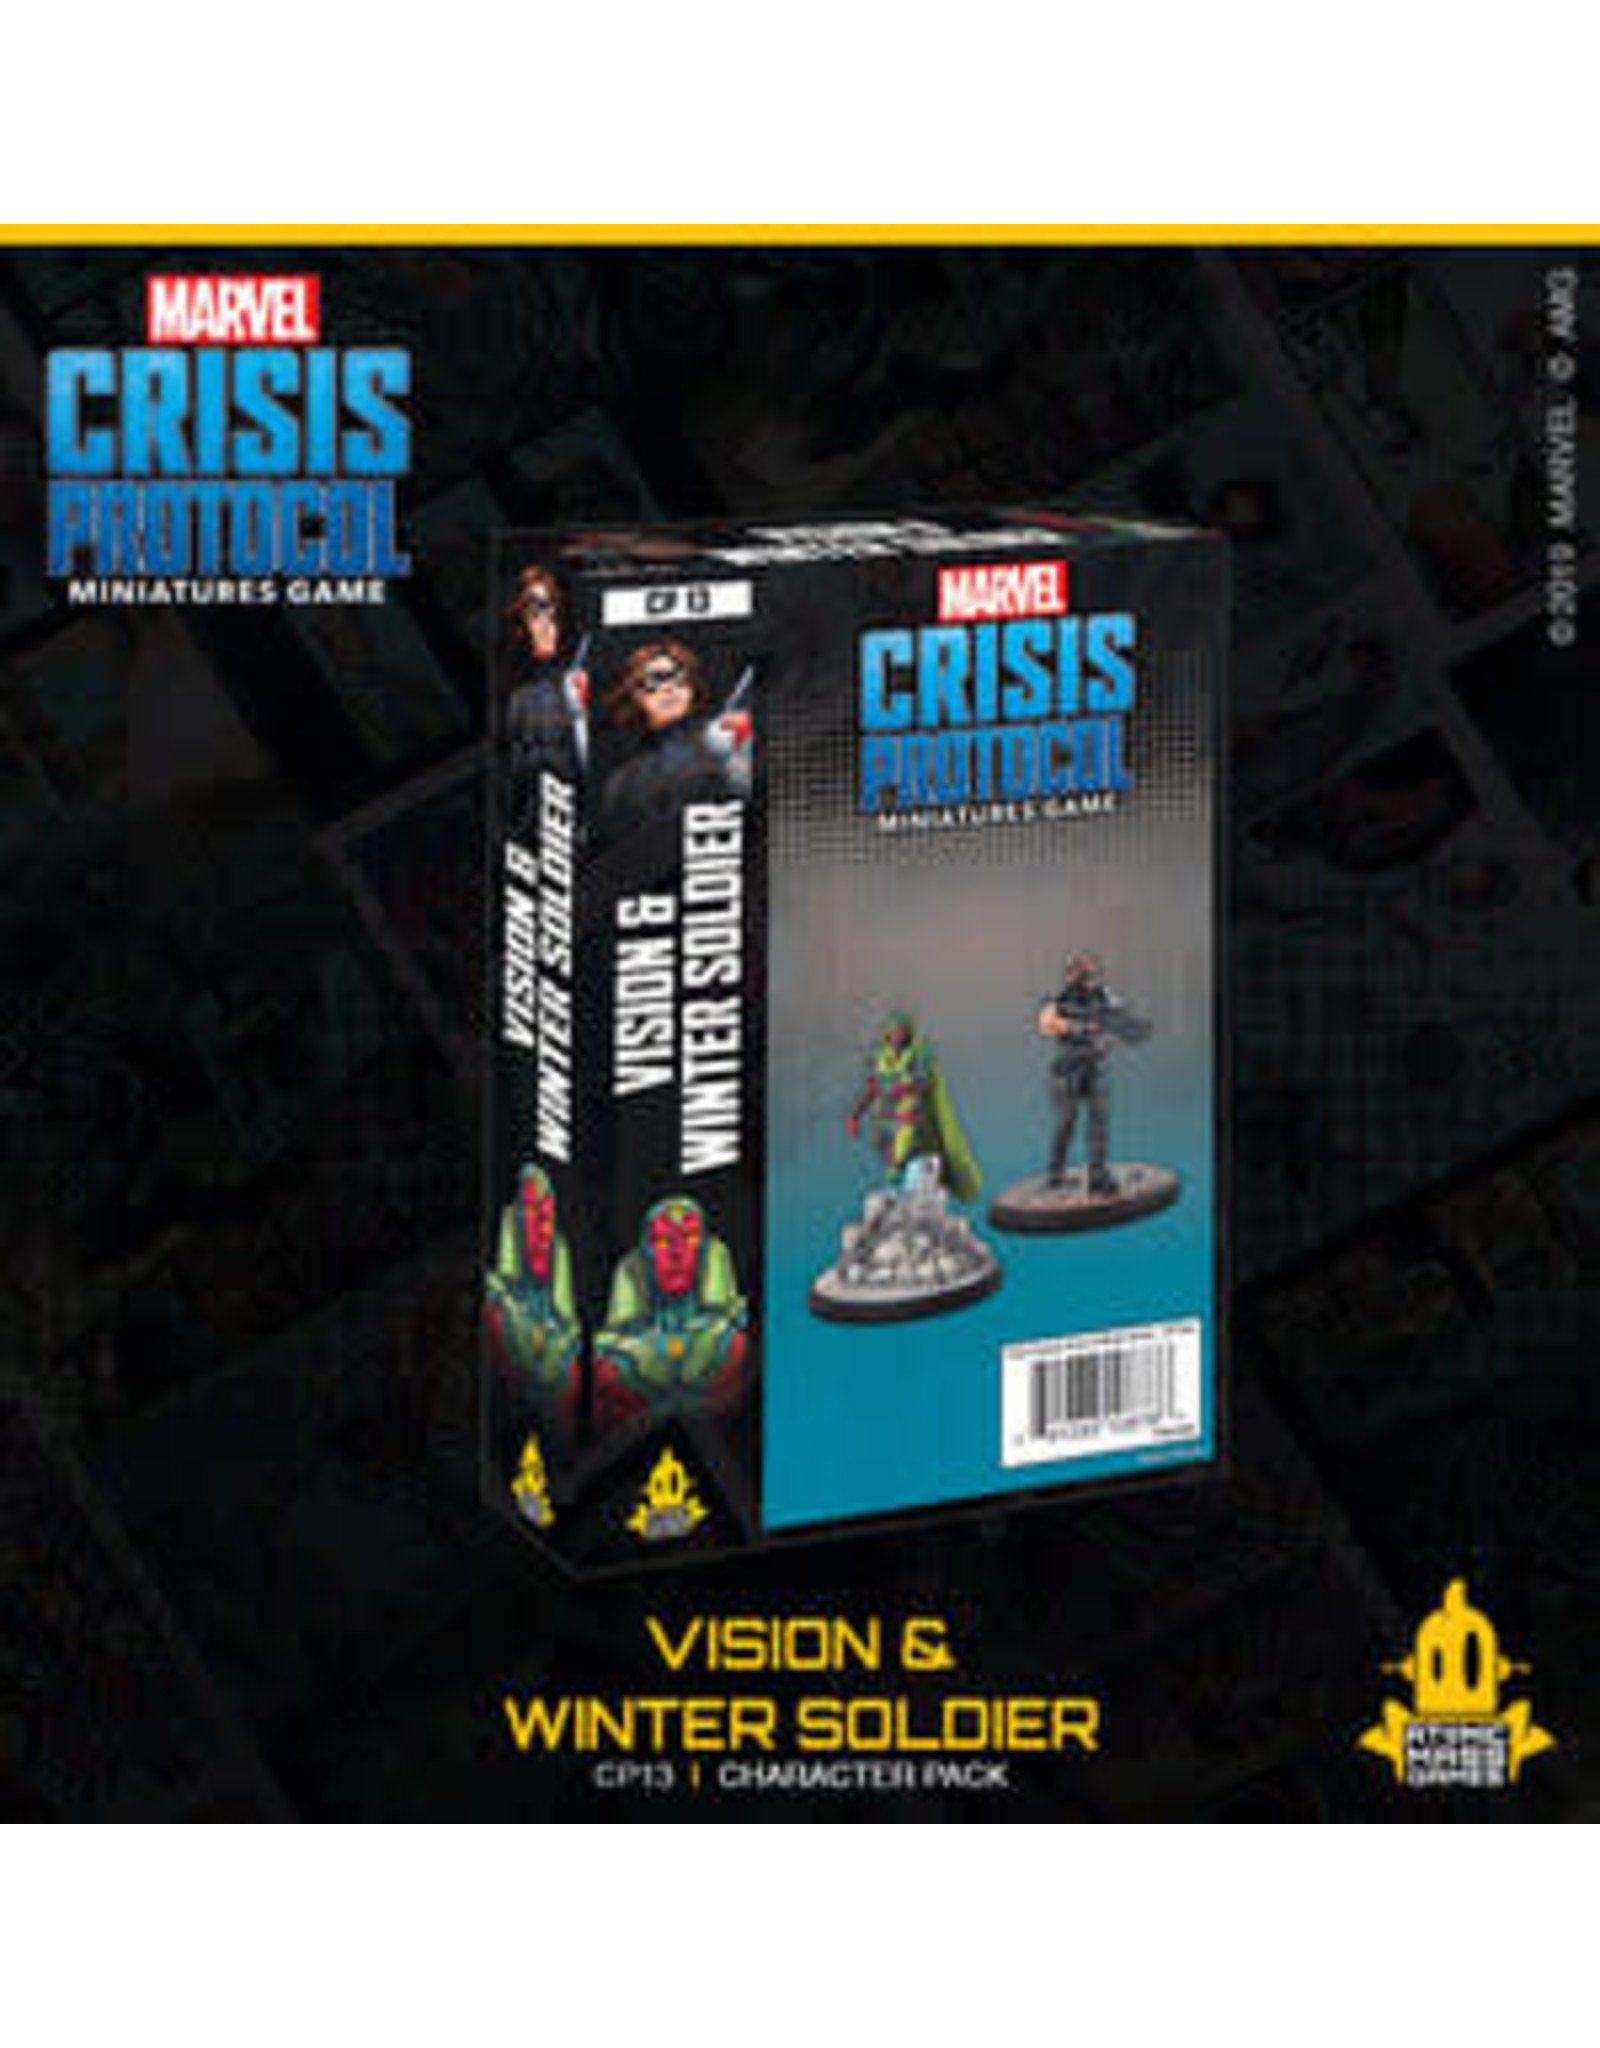 ATOMIC MASS GAMES CP13 Vision & Winter Soldier